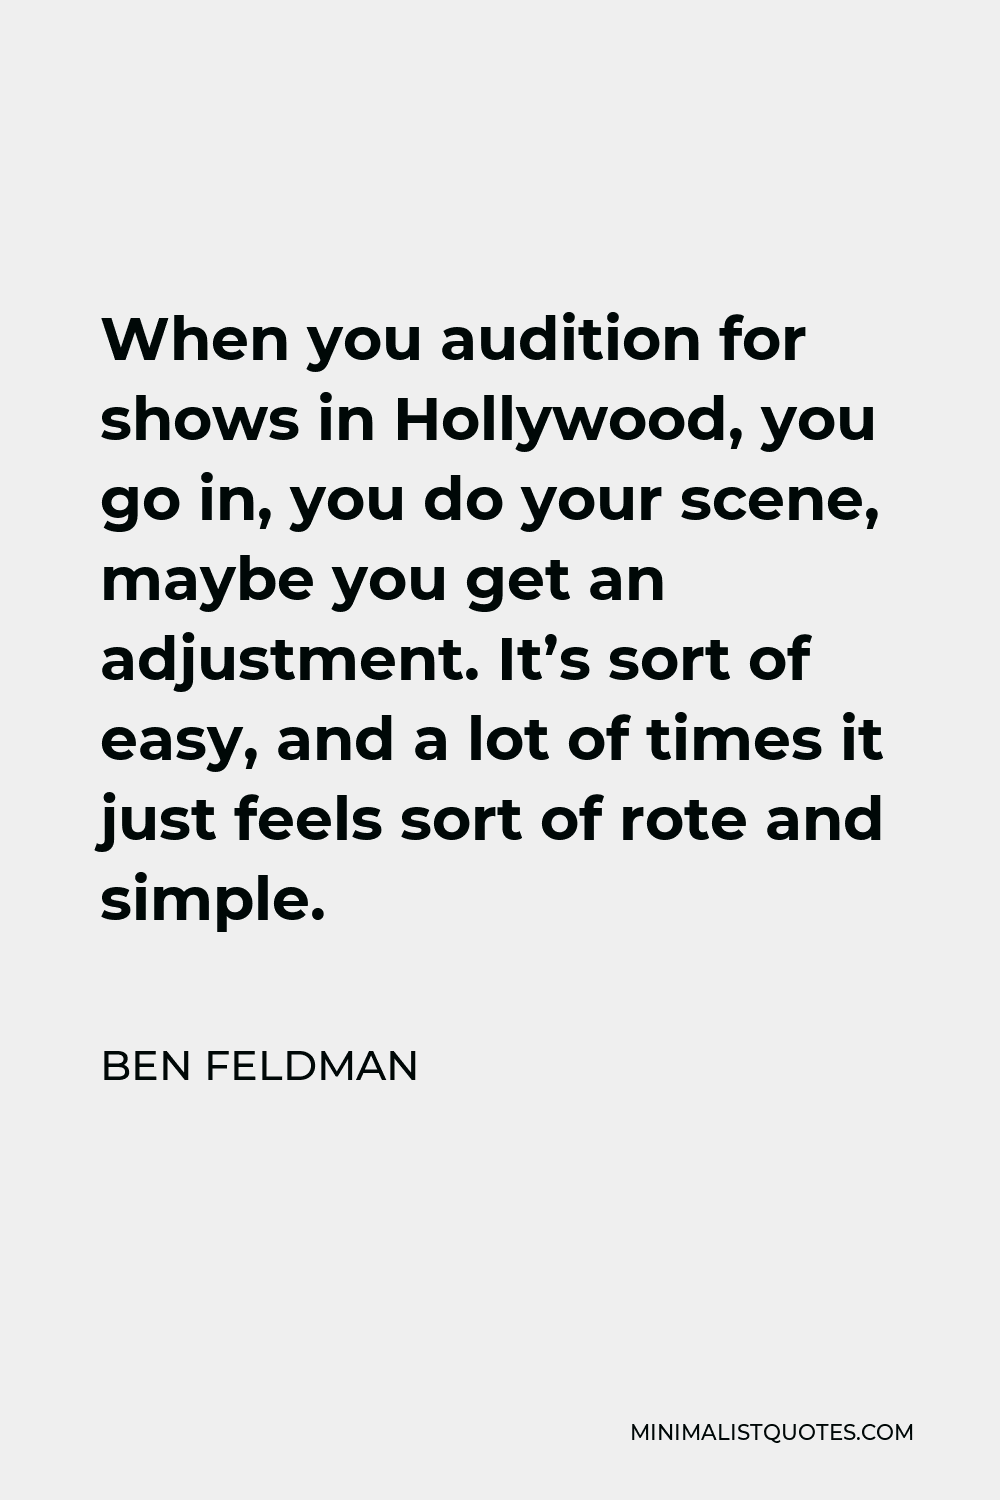 Ben Feldman Quote - When you audition for shows in Hollywood, you go in, you do your scene, maybe you get an adjustment. It’s sort of easy, and a lot of times it just feels sort of rote and simple.